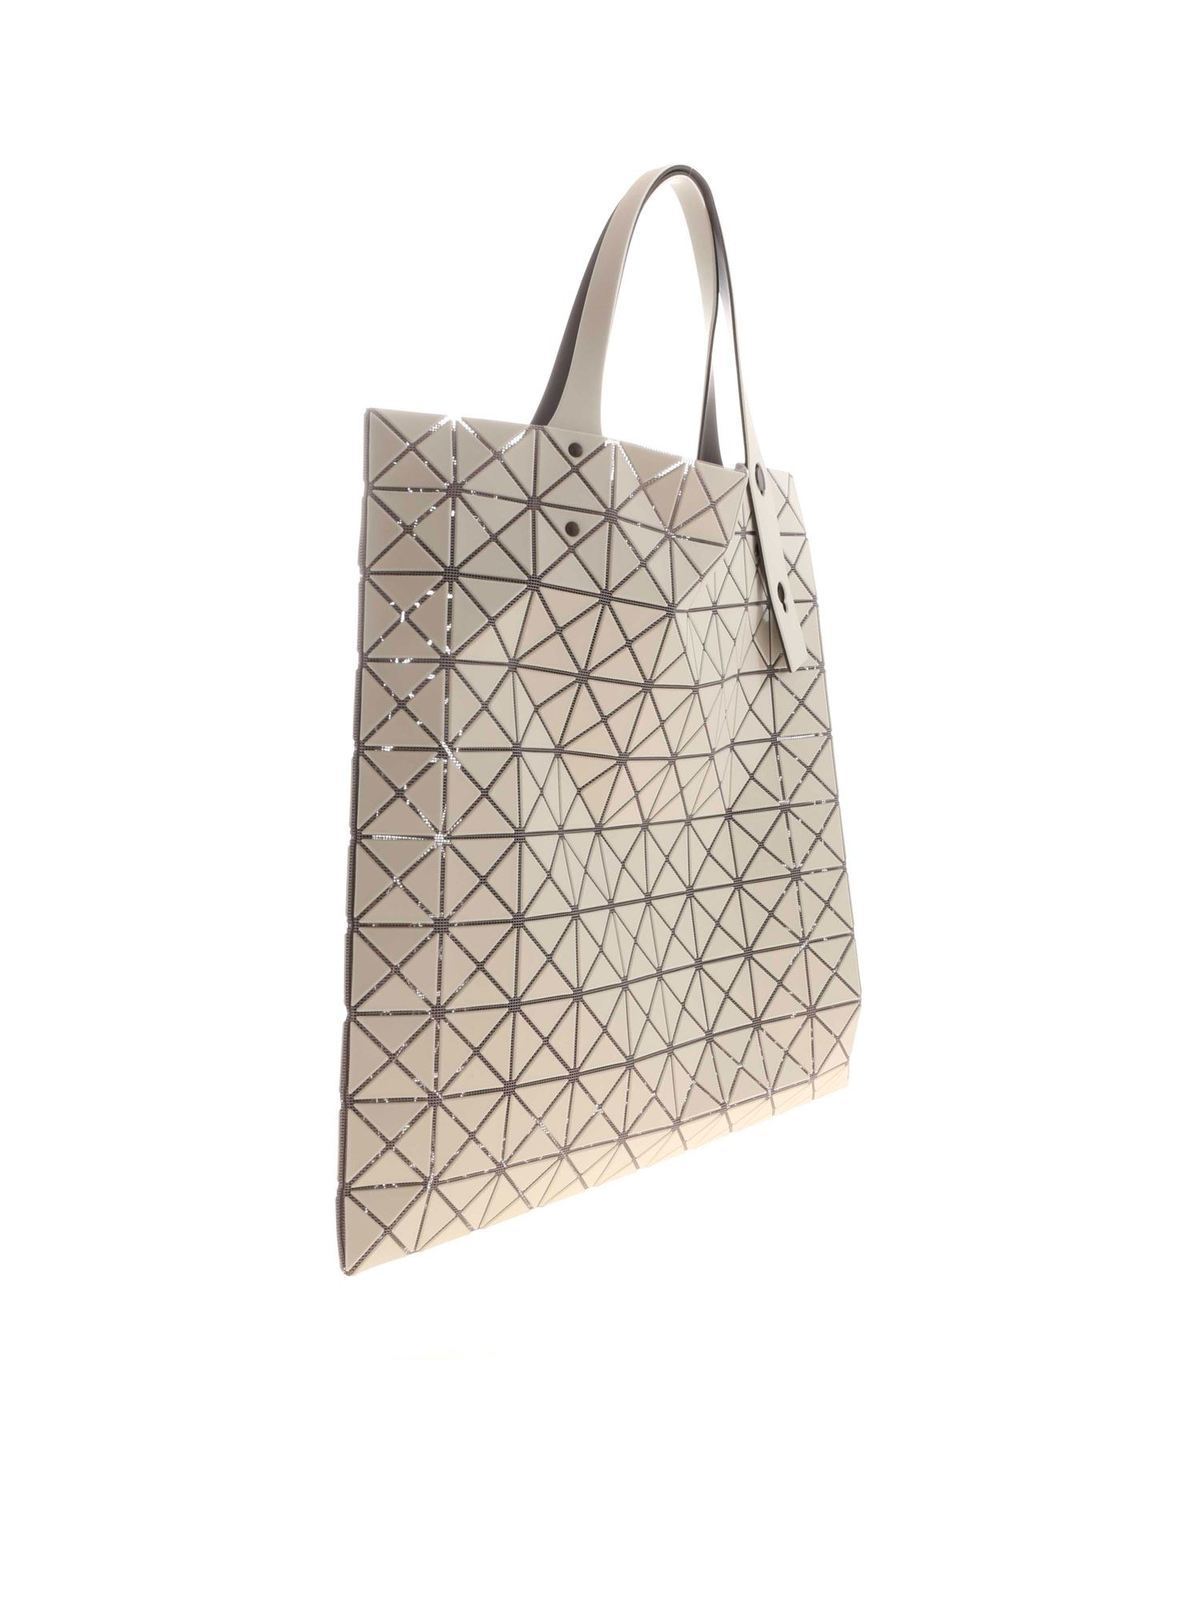 Totes bags Bao Bao Issey Miyake - Prism Frost tote in white 